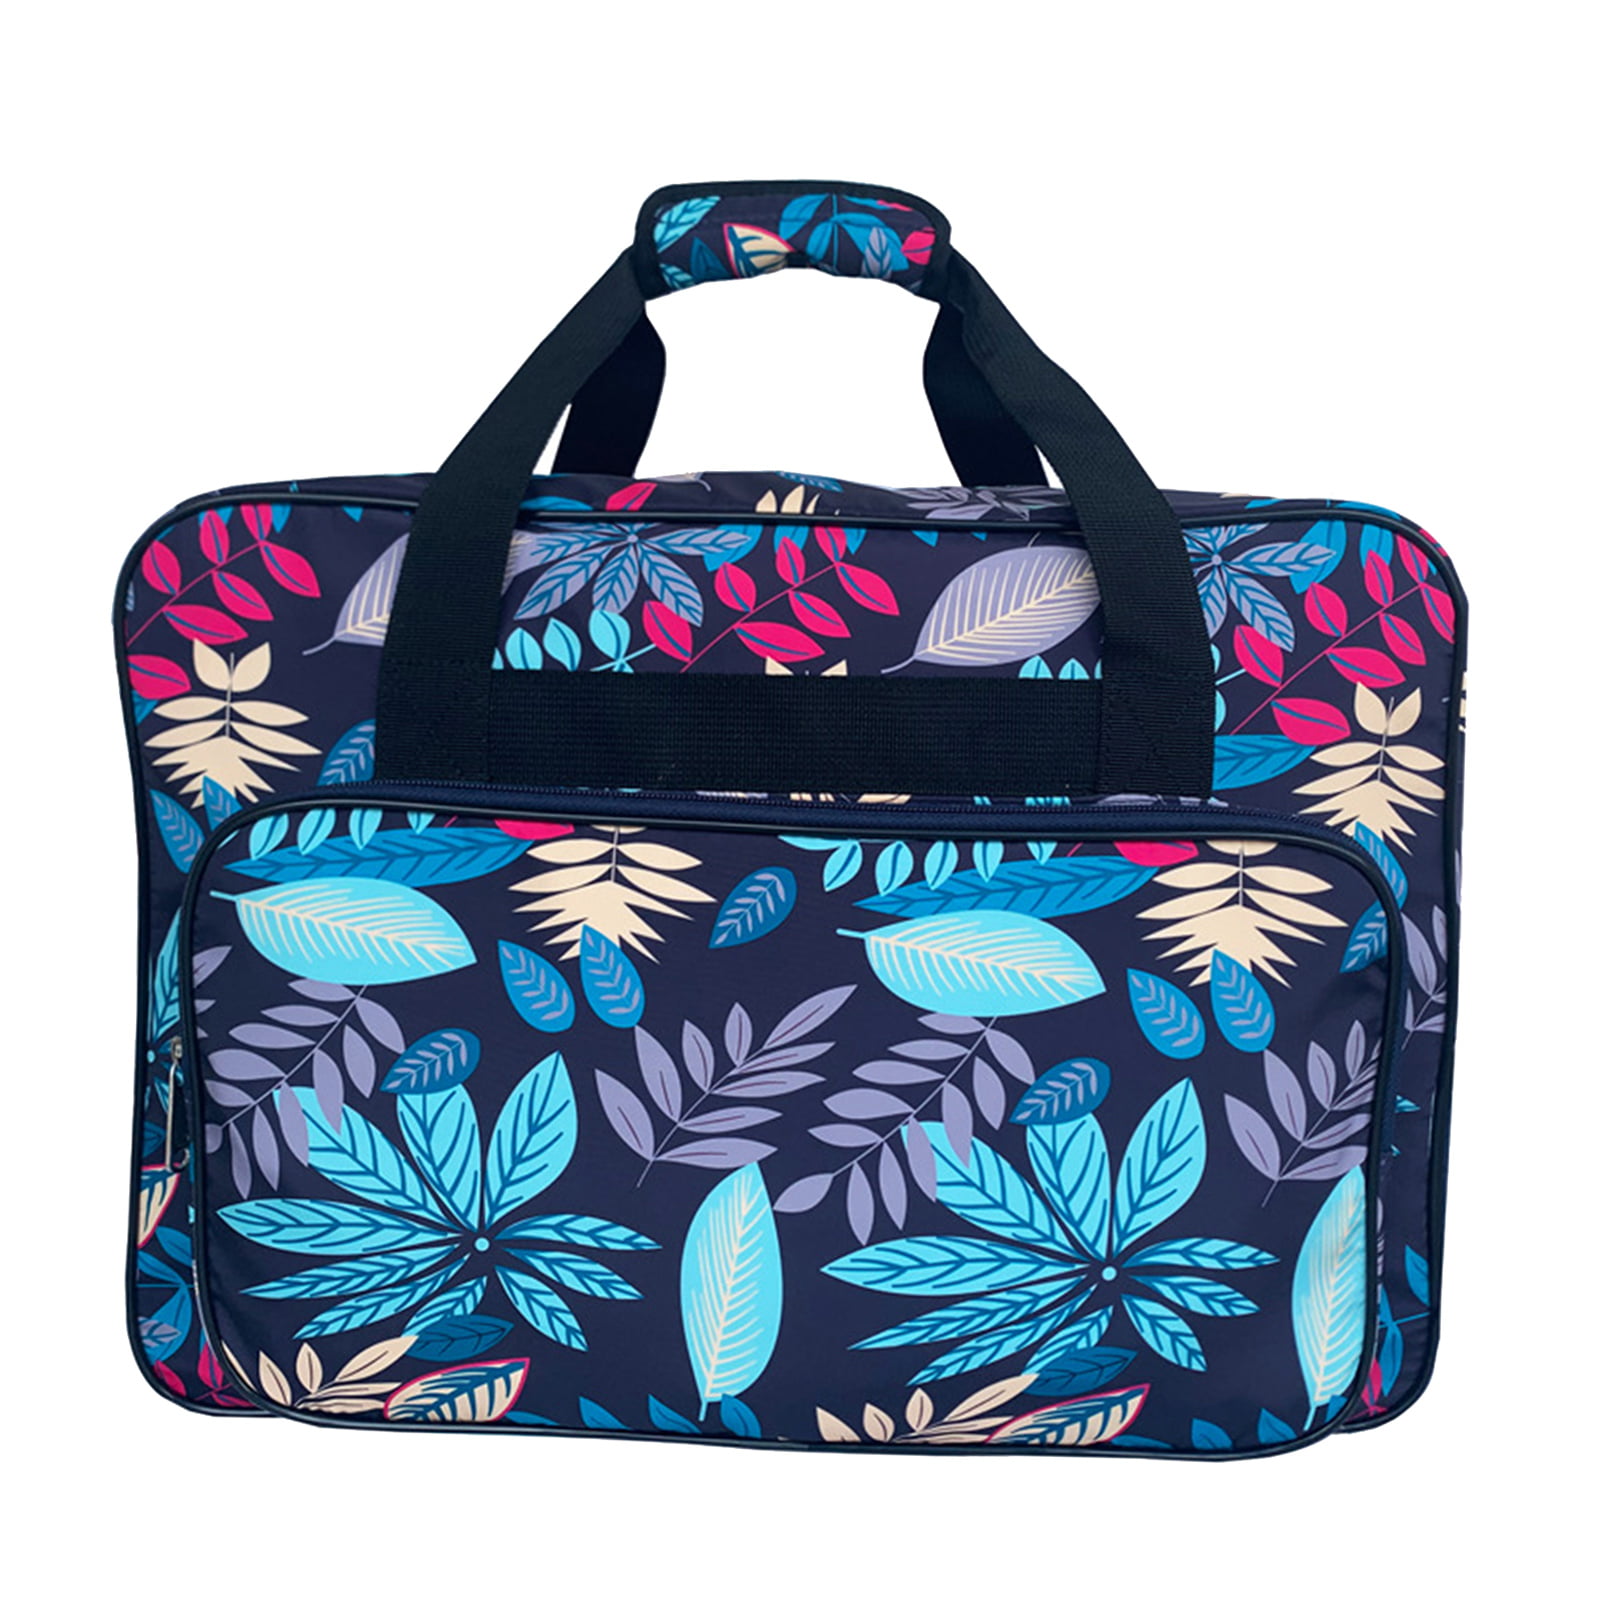 Floral Brother Compatible with Most Standard Singer Universal Tote Bag with Large Front Pocket for Various Sewing Accessories HOMEST Sewing Machine Carrying Case with Multiple Pockets Janome 